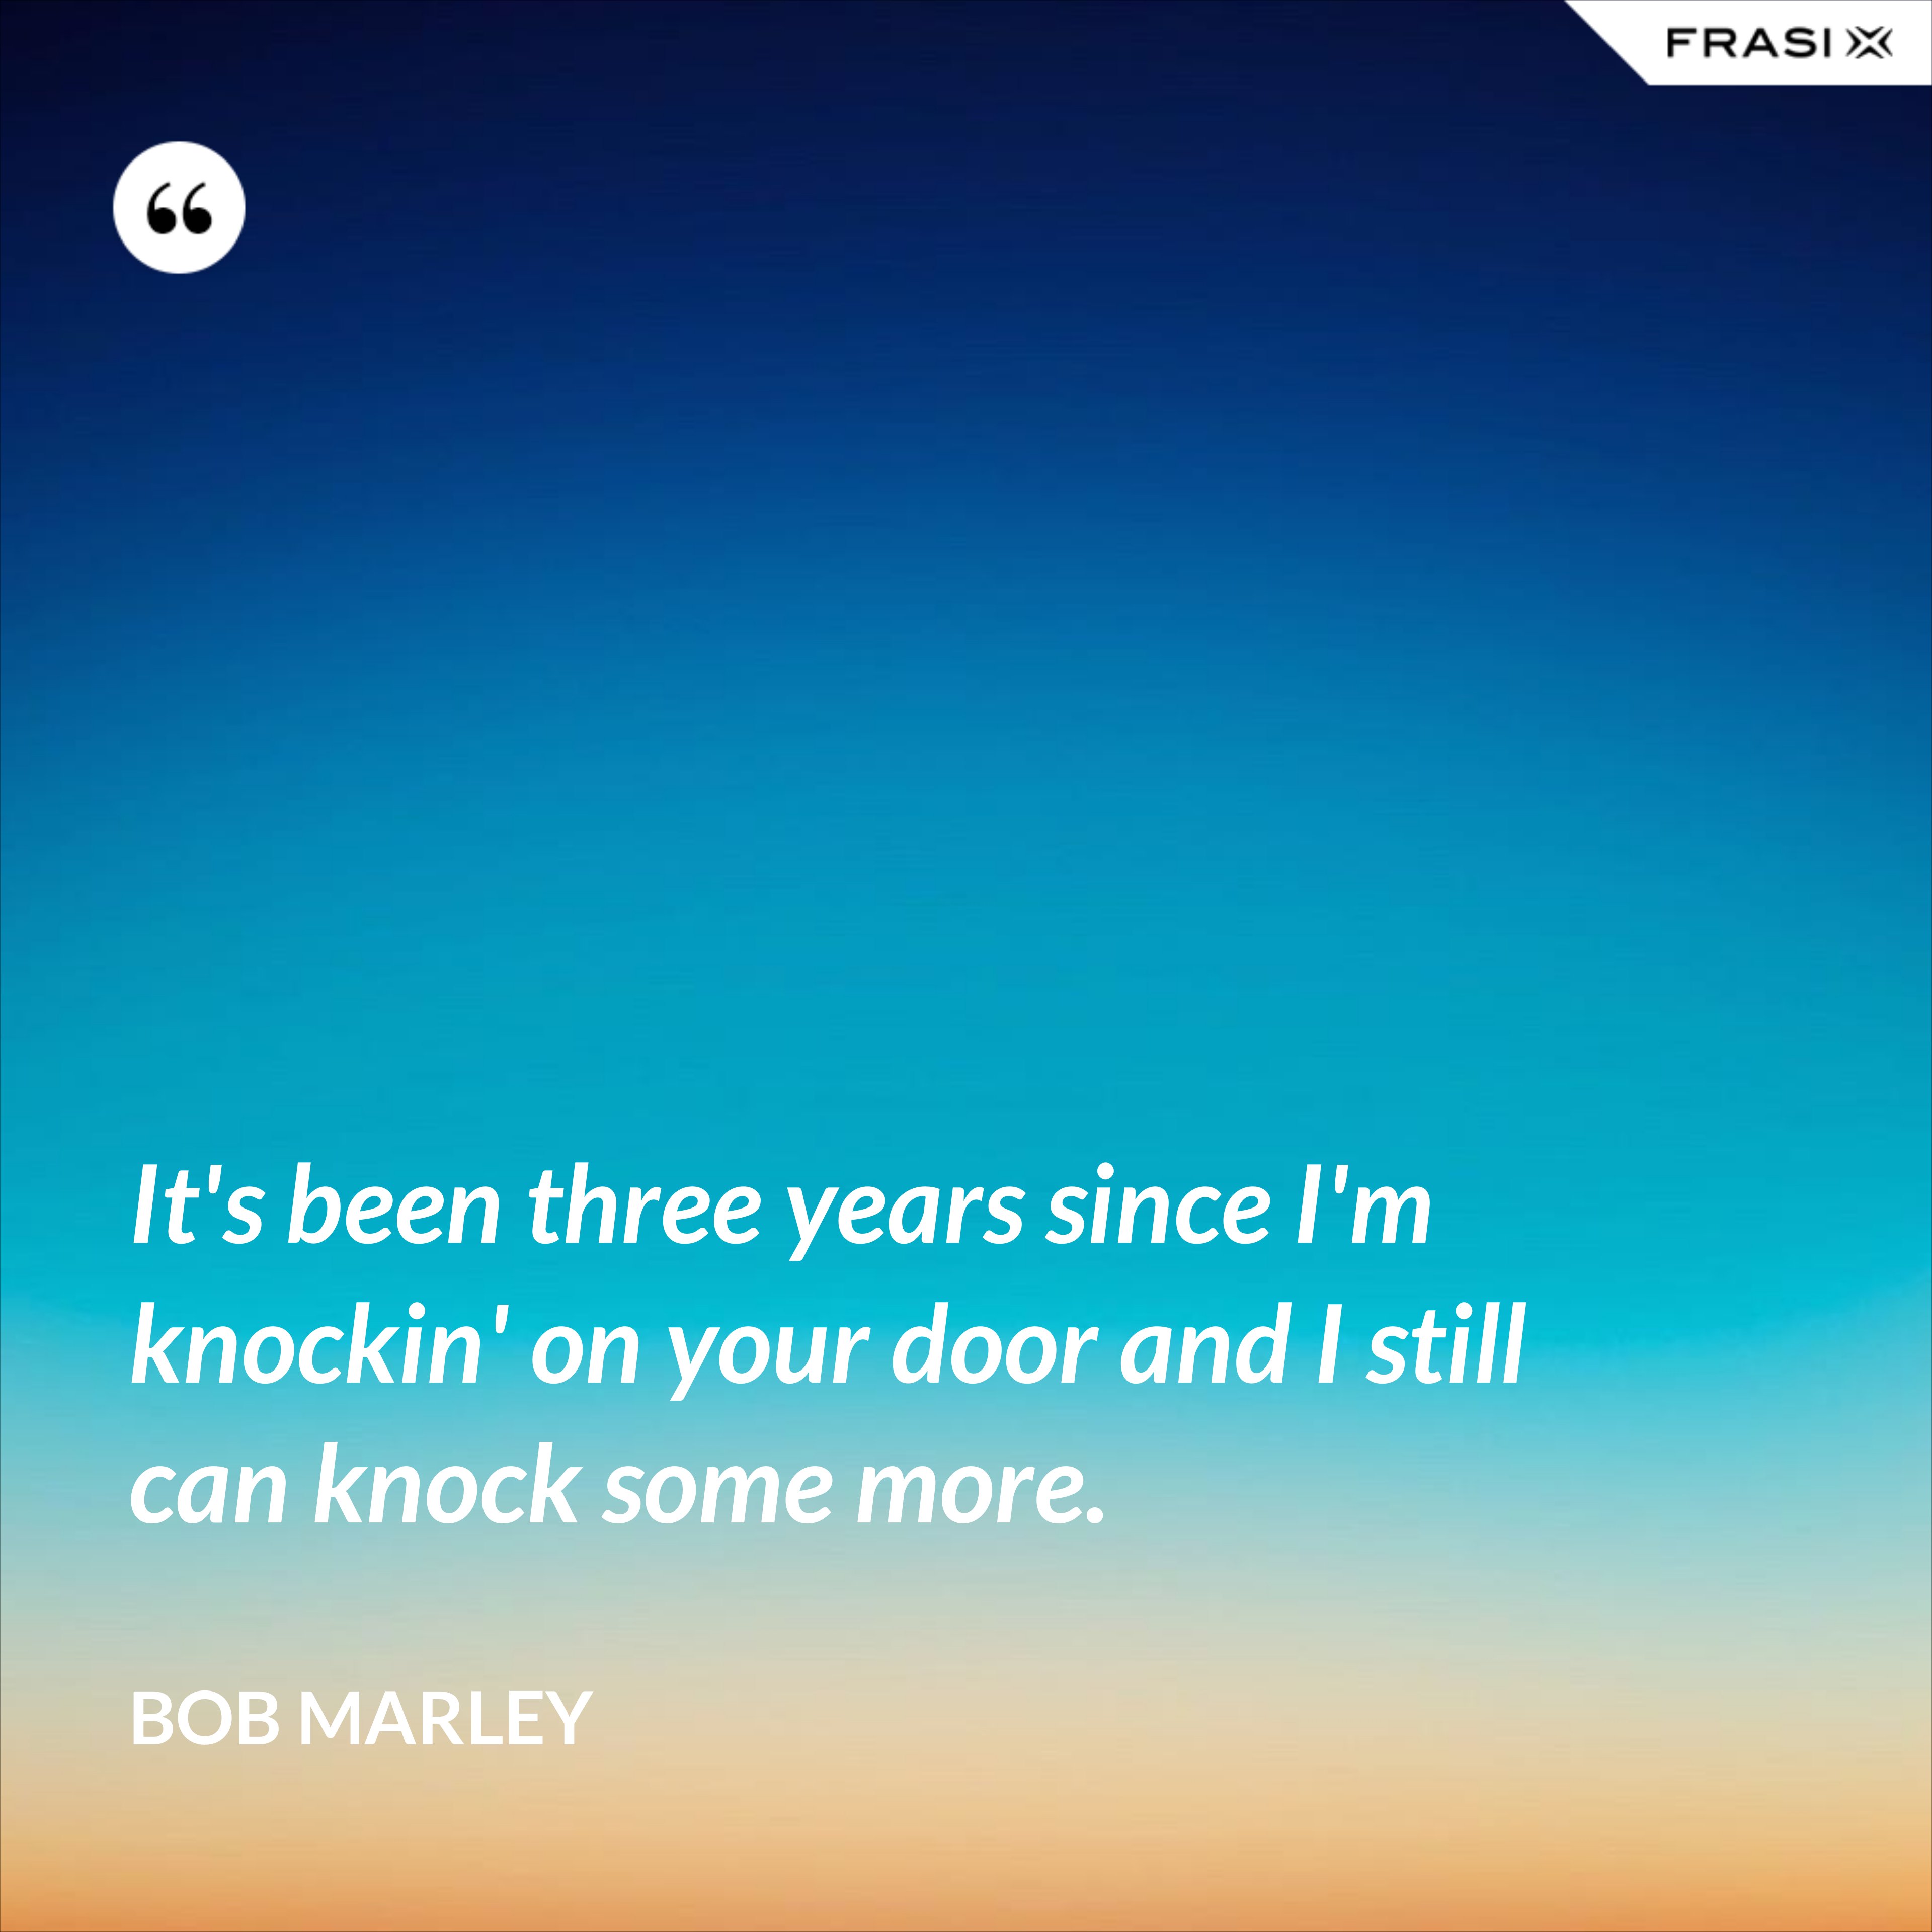 It's been three years since I'm knockin' on your door and I still can knock some more. - Bob Marley